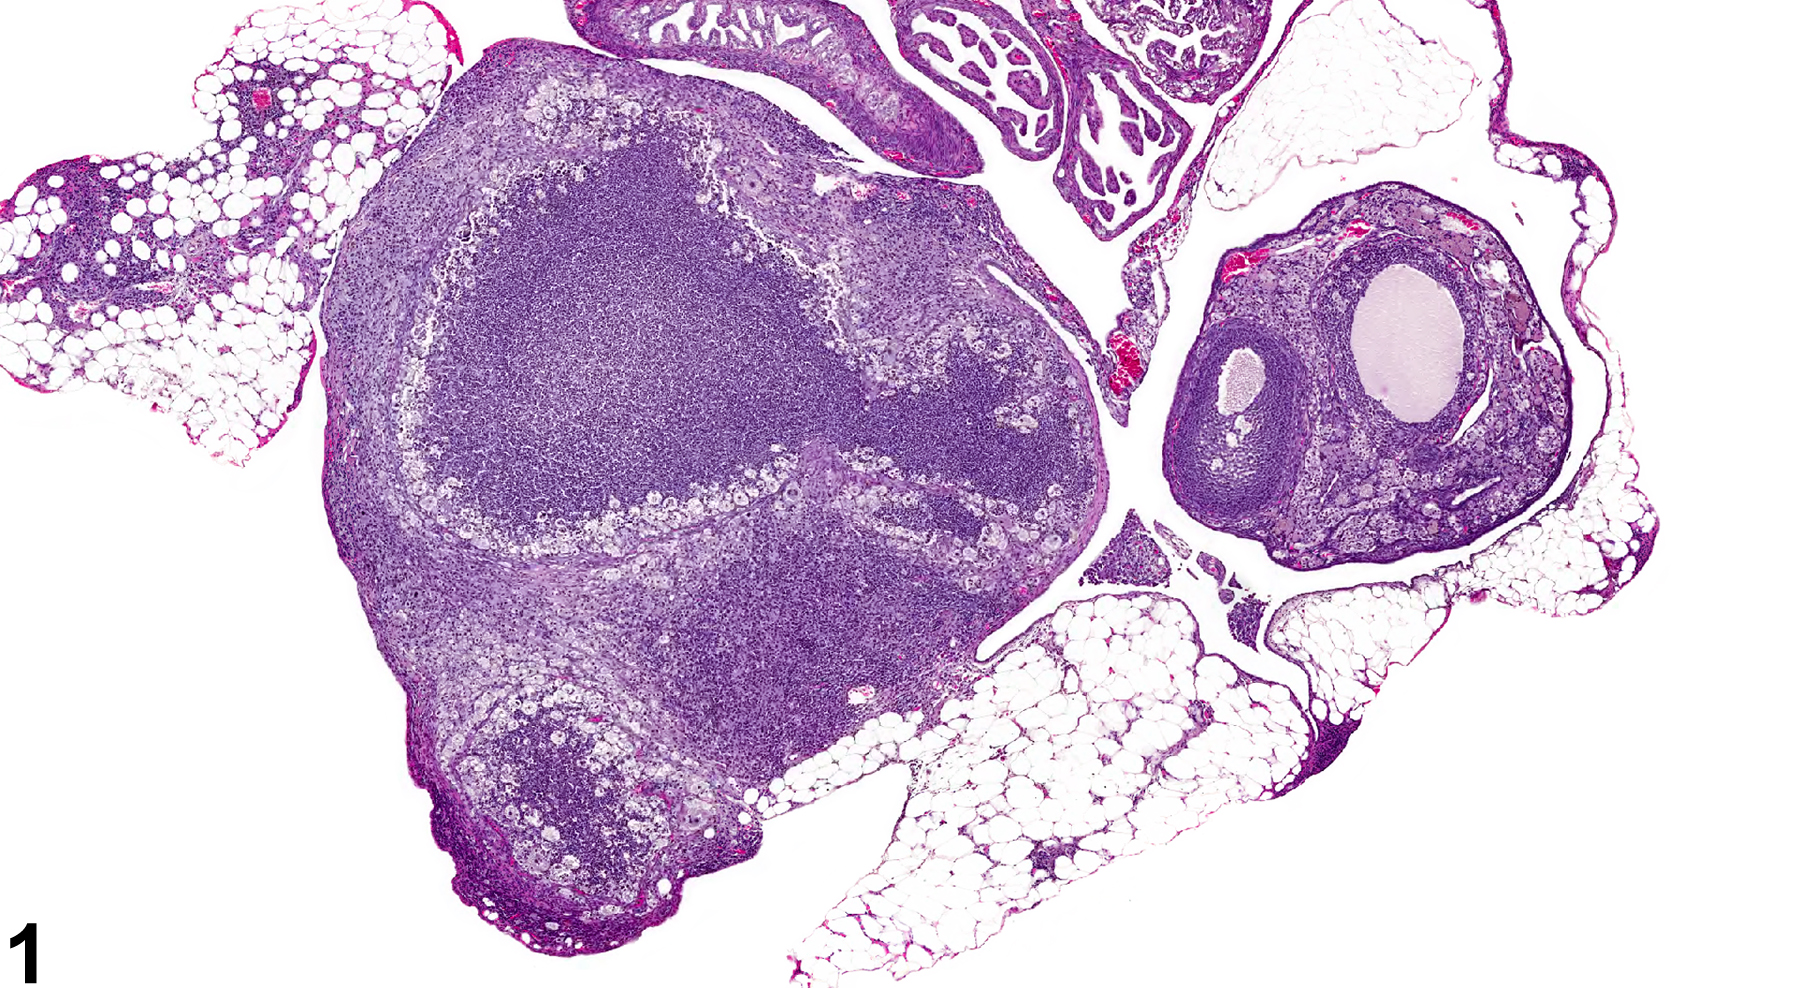 Image of inflammation, suppurative in the ovary from a female B6C3F1 mouse in a chronic study